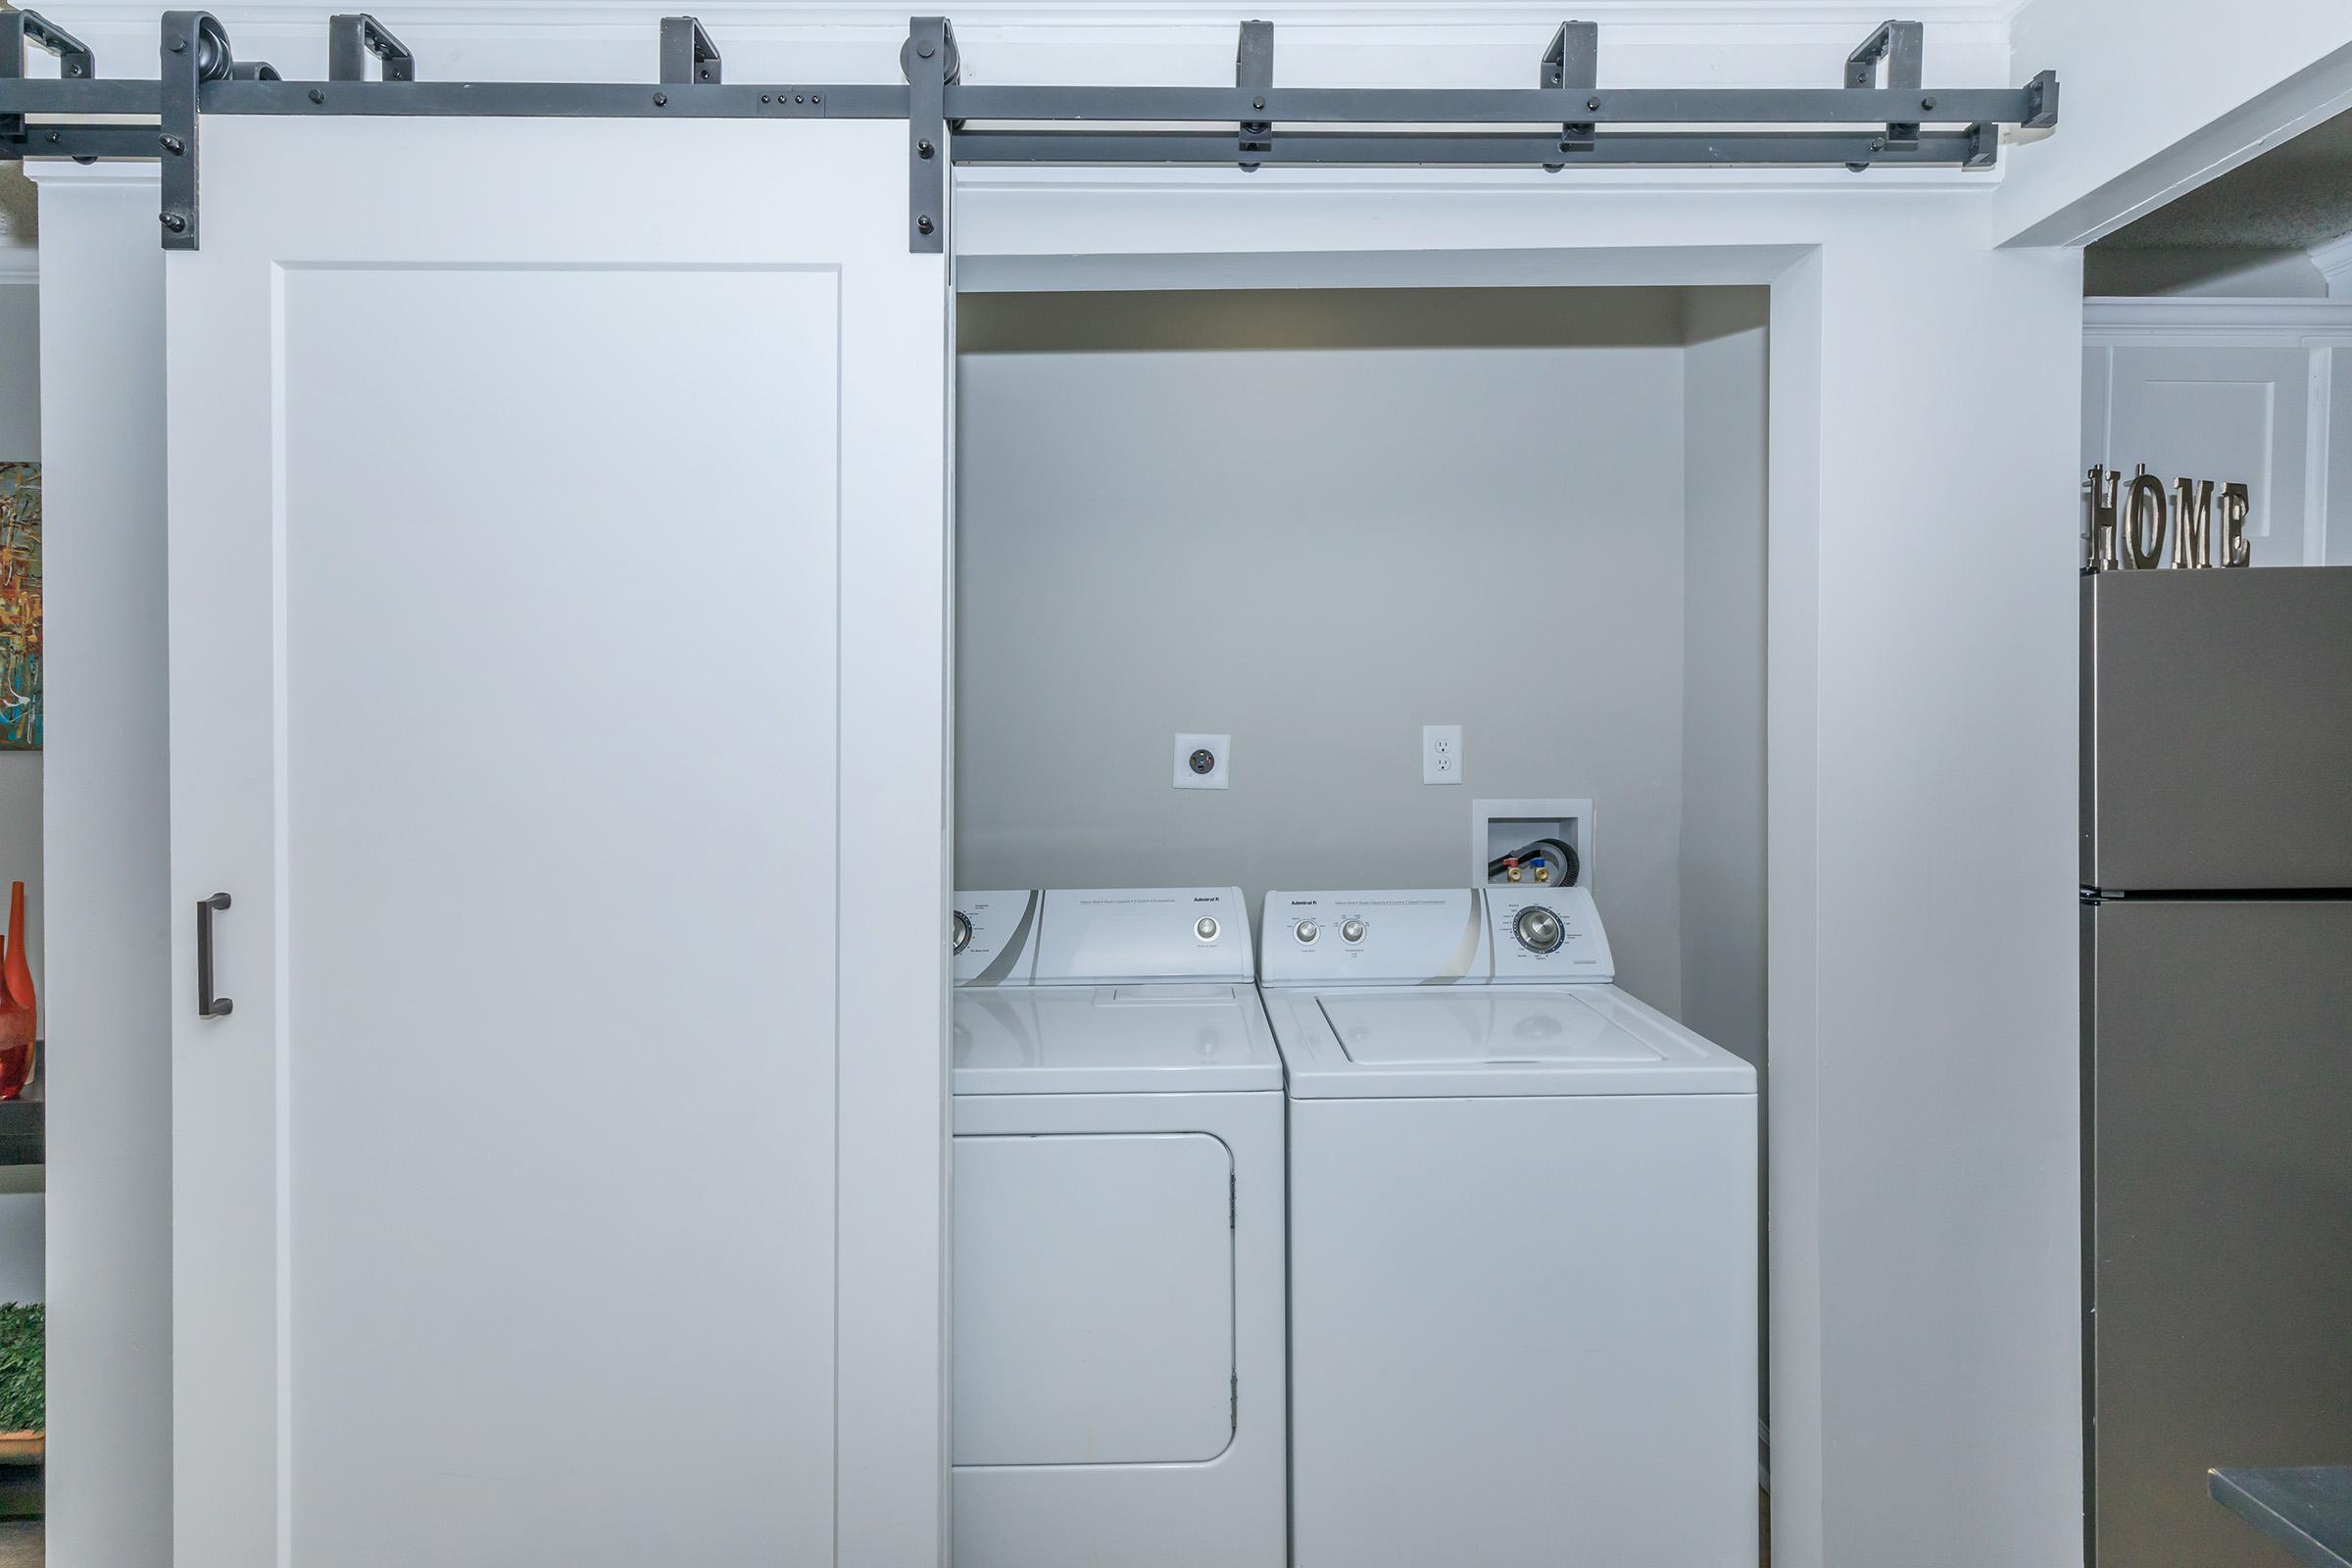 KINGSTON POINTE APARTMENTS HAS WASHER AND DRYER CONNECTIONS